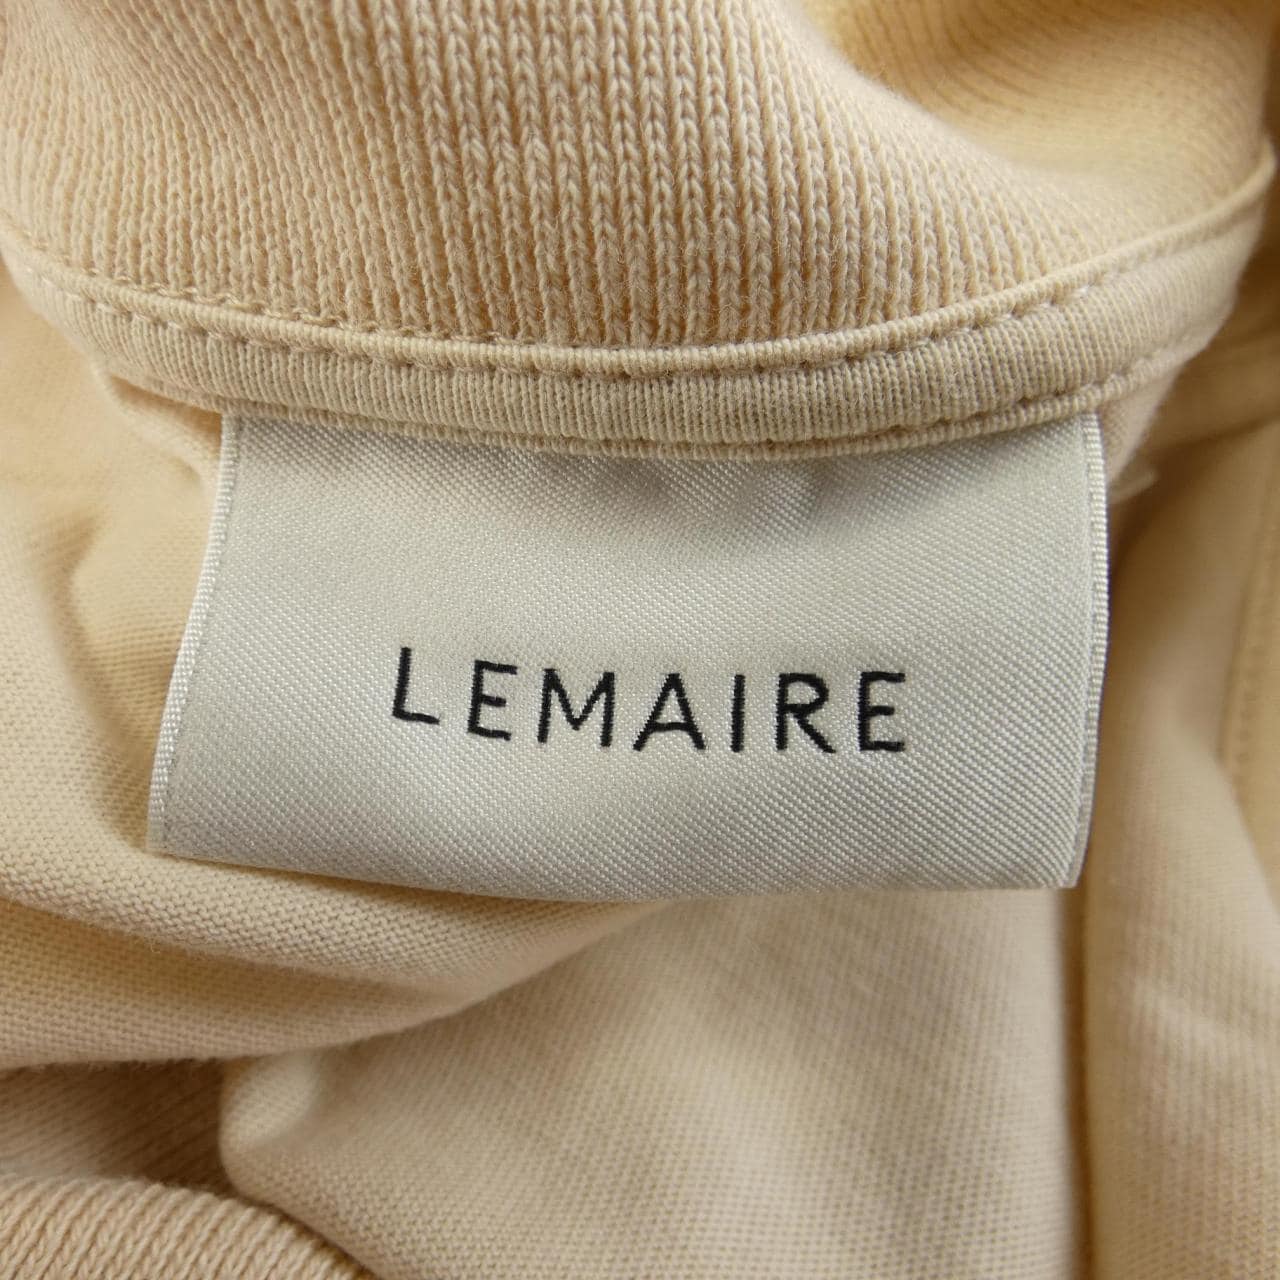 LEMAIRE POLO衫